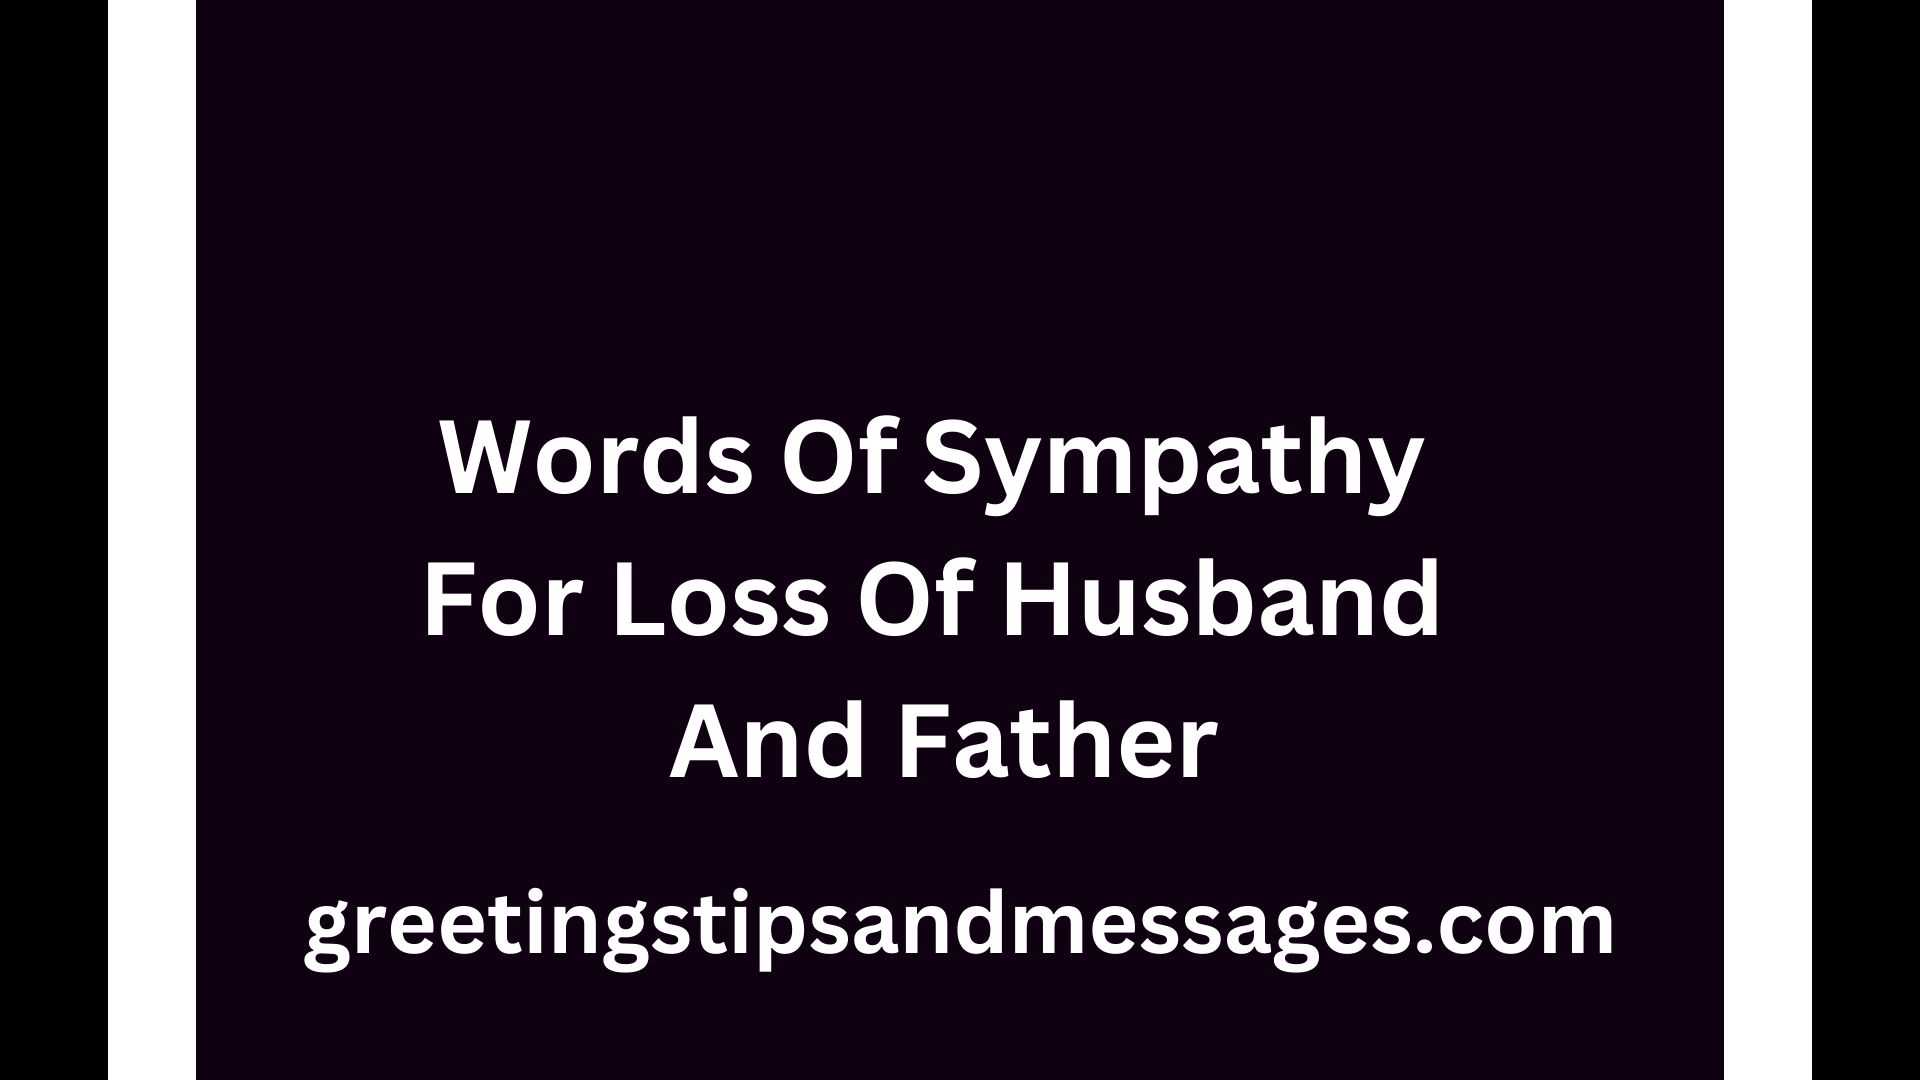 Words Of Sympathy For Loss Of Husband And Father